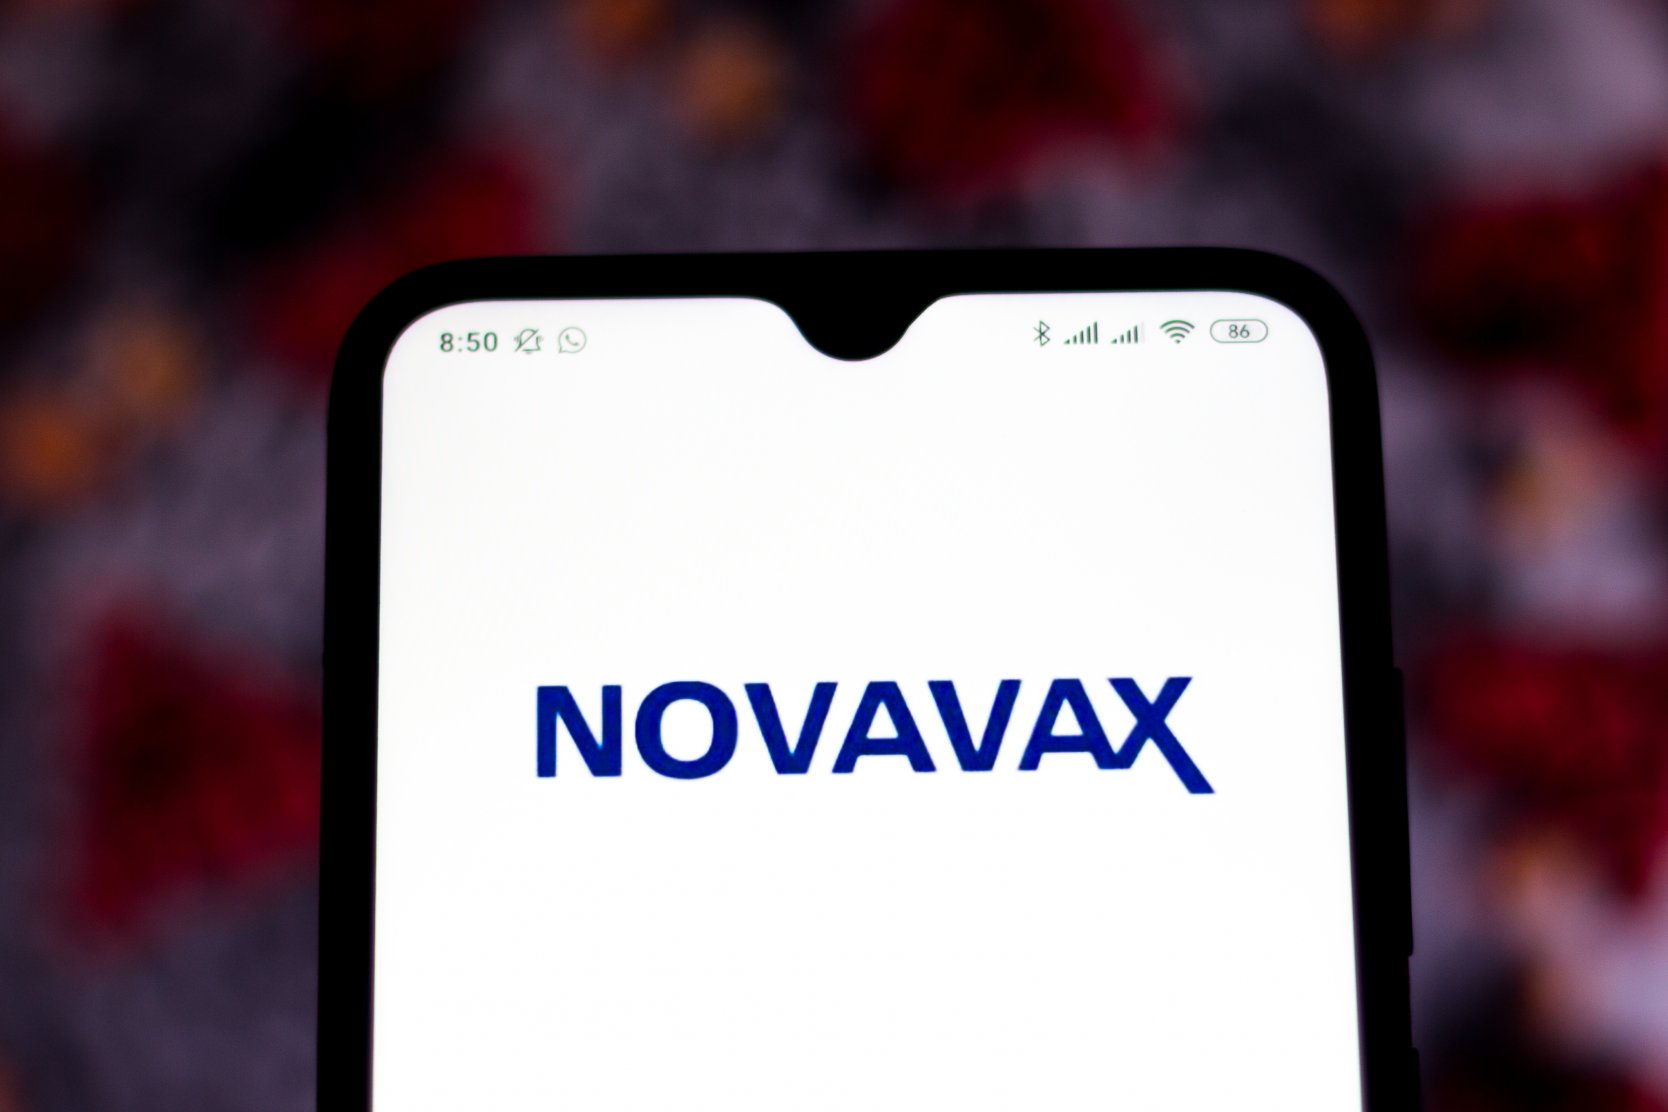 Novavax stock forecast is there going to be a cash injection?